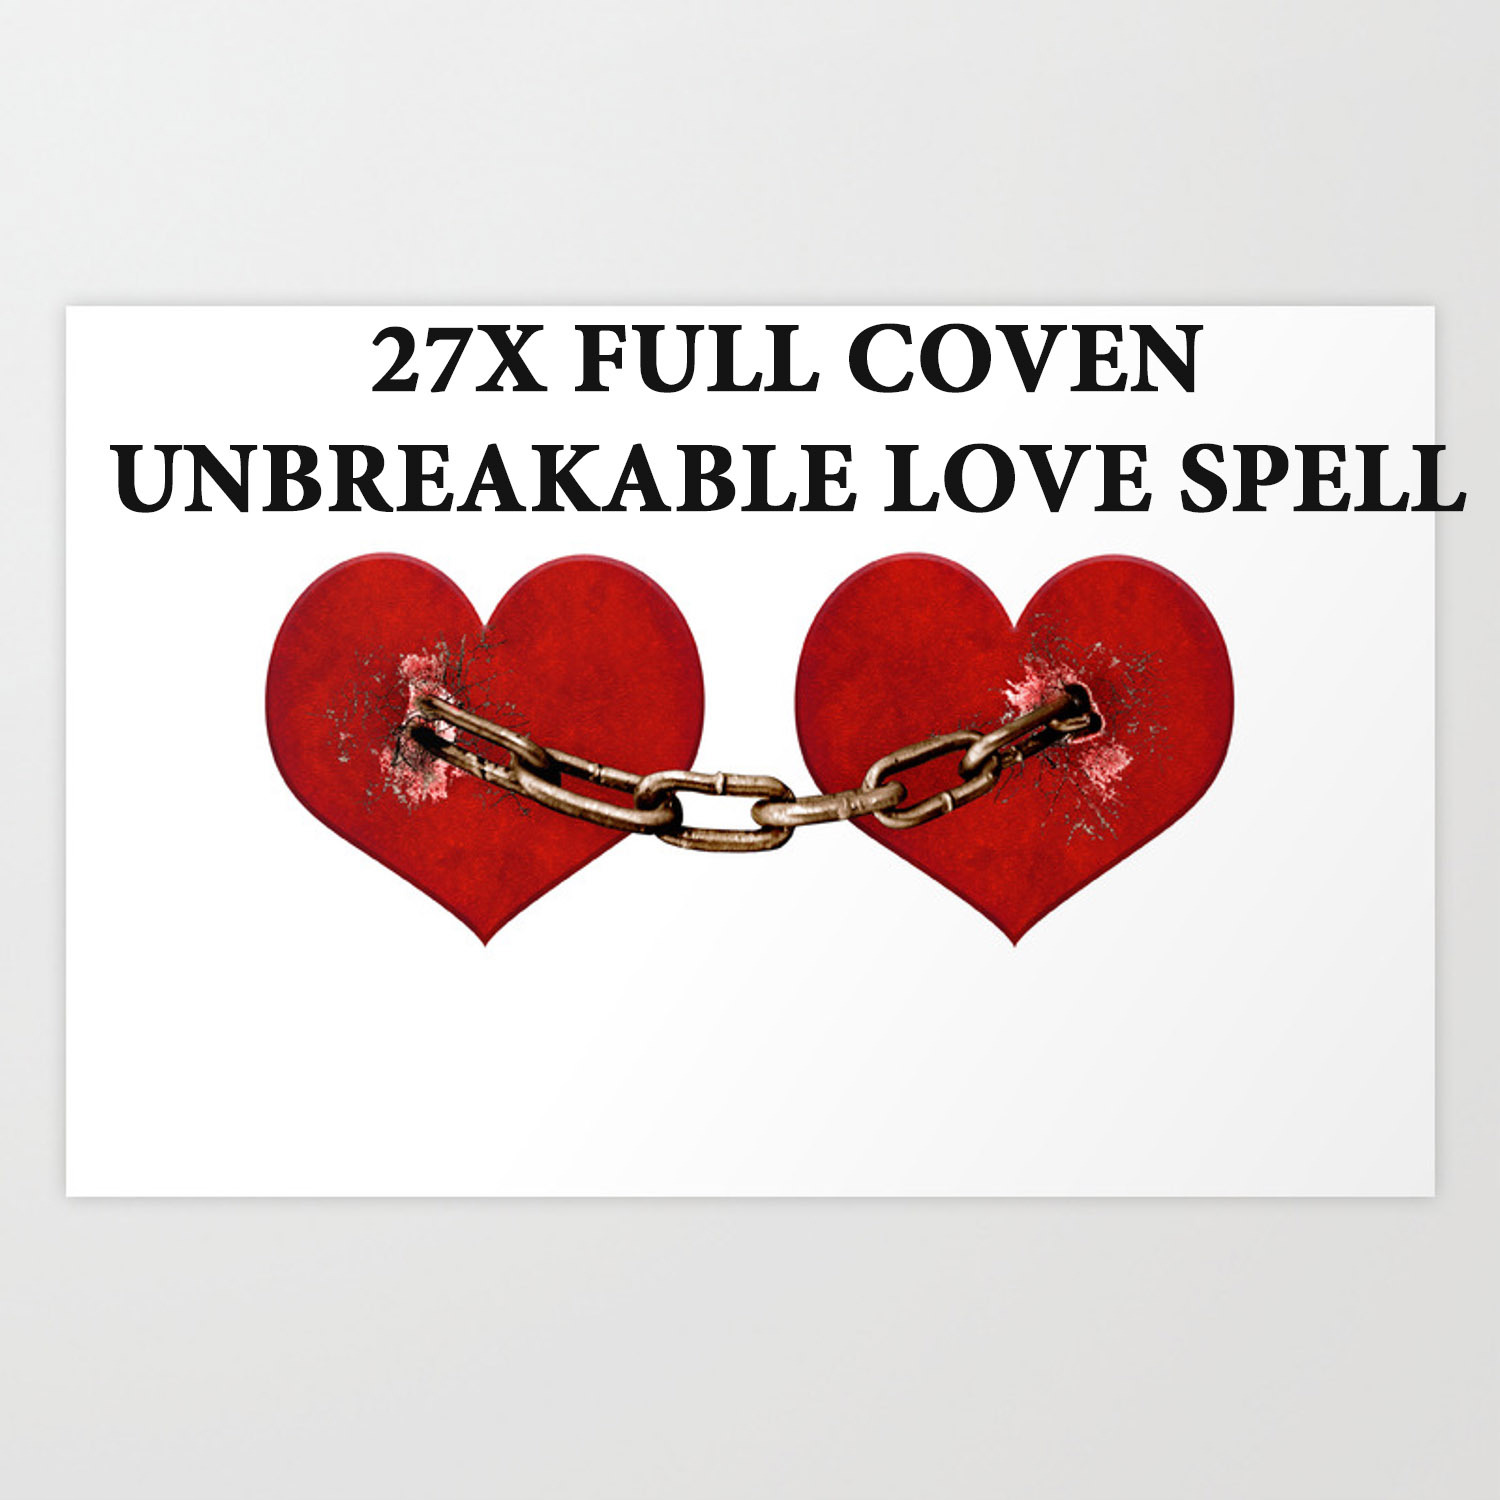 27X FULL COVEN UNBREAKABLE LOVE TIES THE STRONGEST LOVE MAGICK 99 Witch CASSIA4